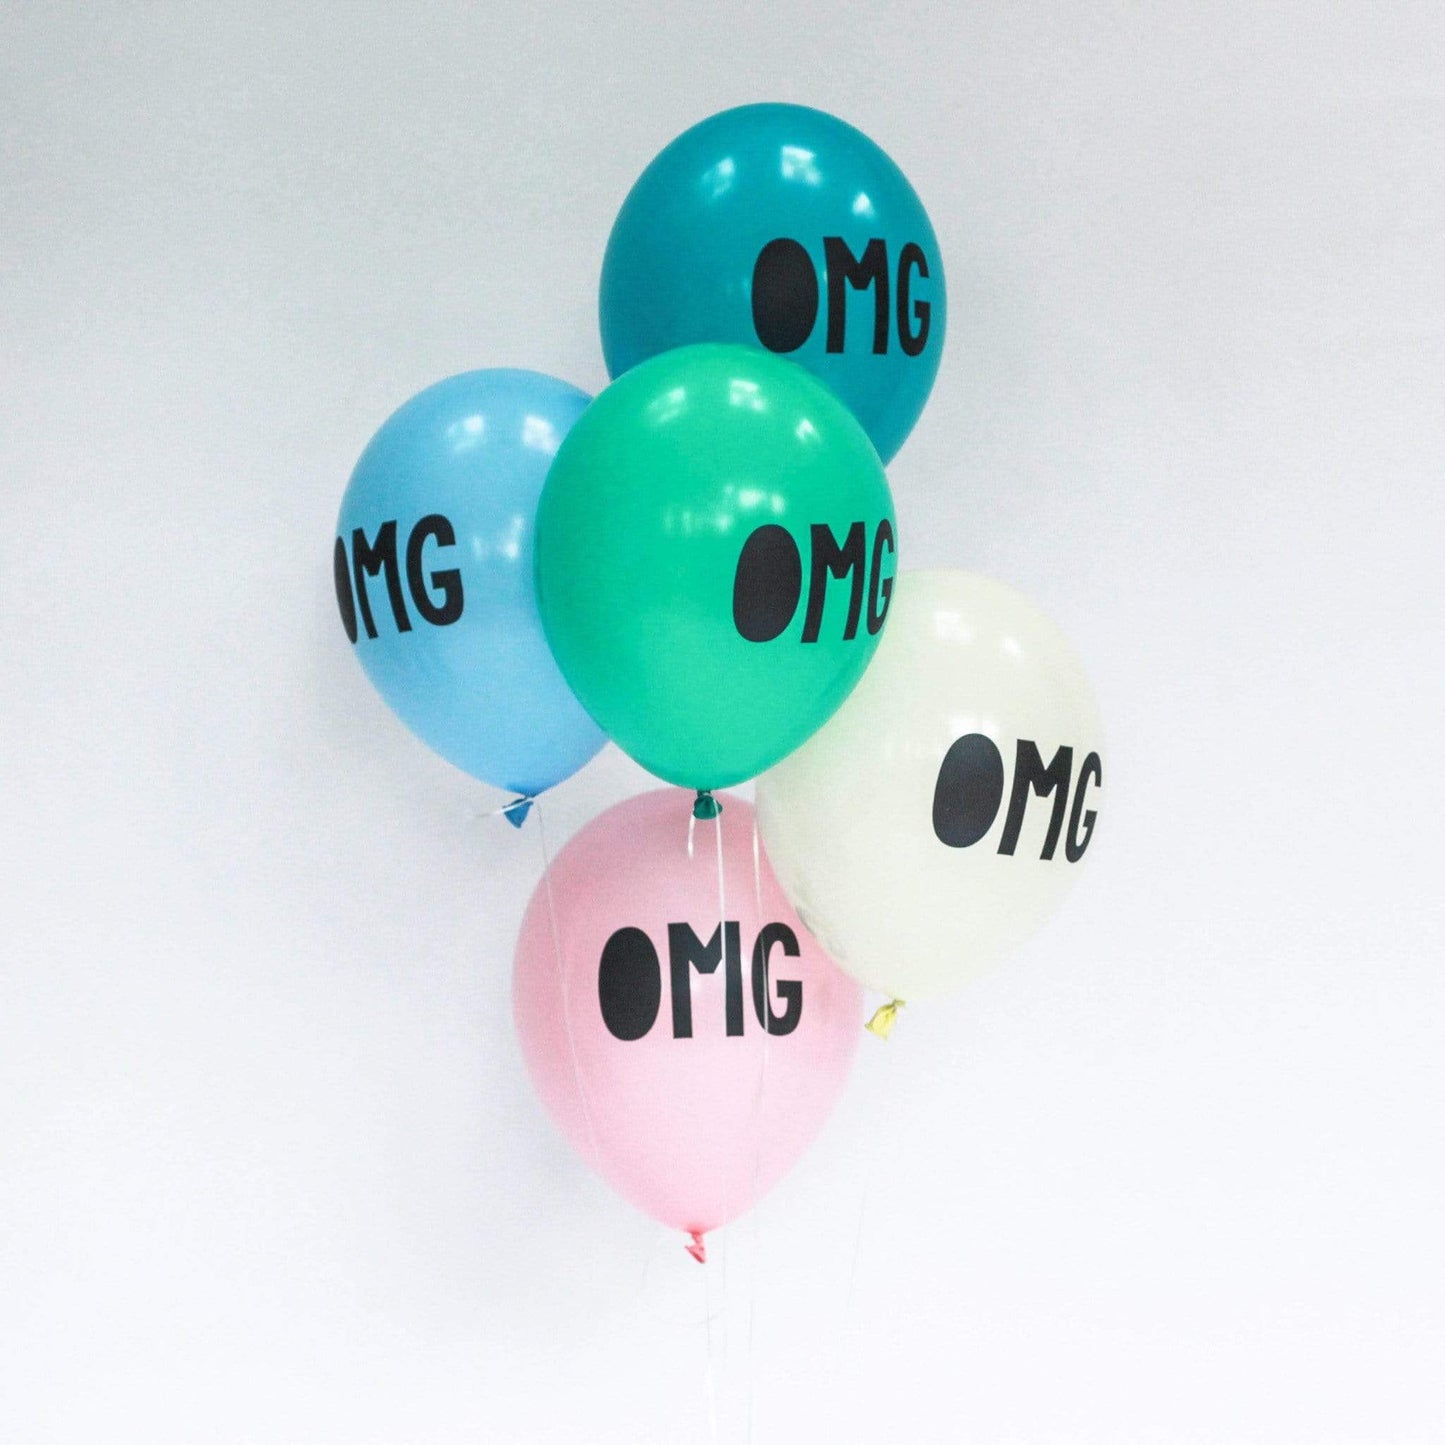 OMG Balloons Blue | Unique Balloons | Modern Party Balloons UK Pretty Little Party Shop